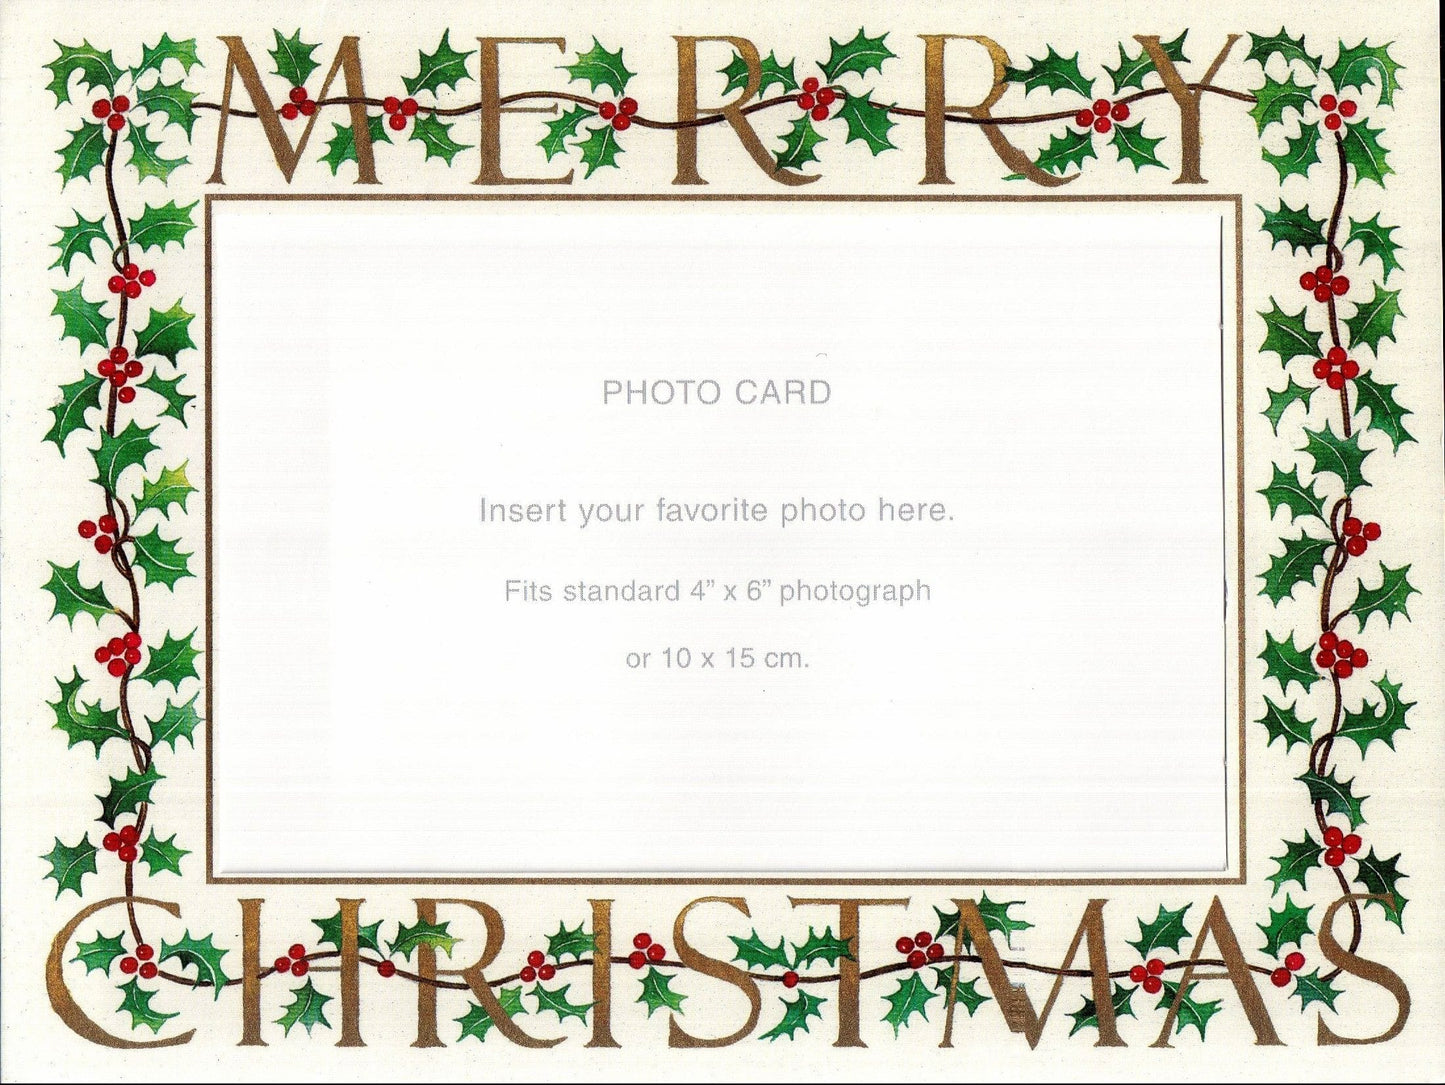 Merry Christmas Photo Card - Shelburne Country Store